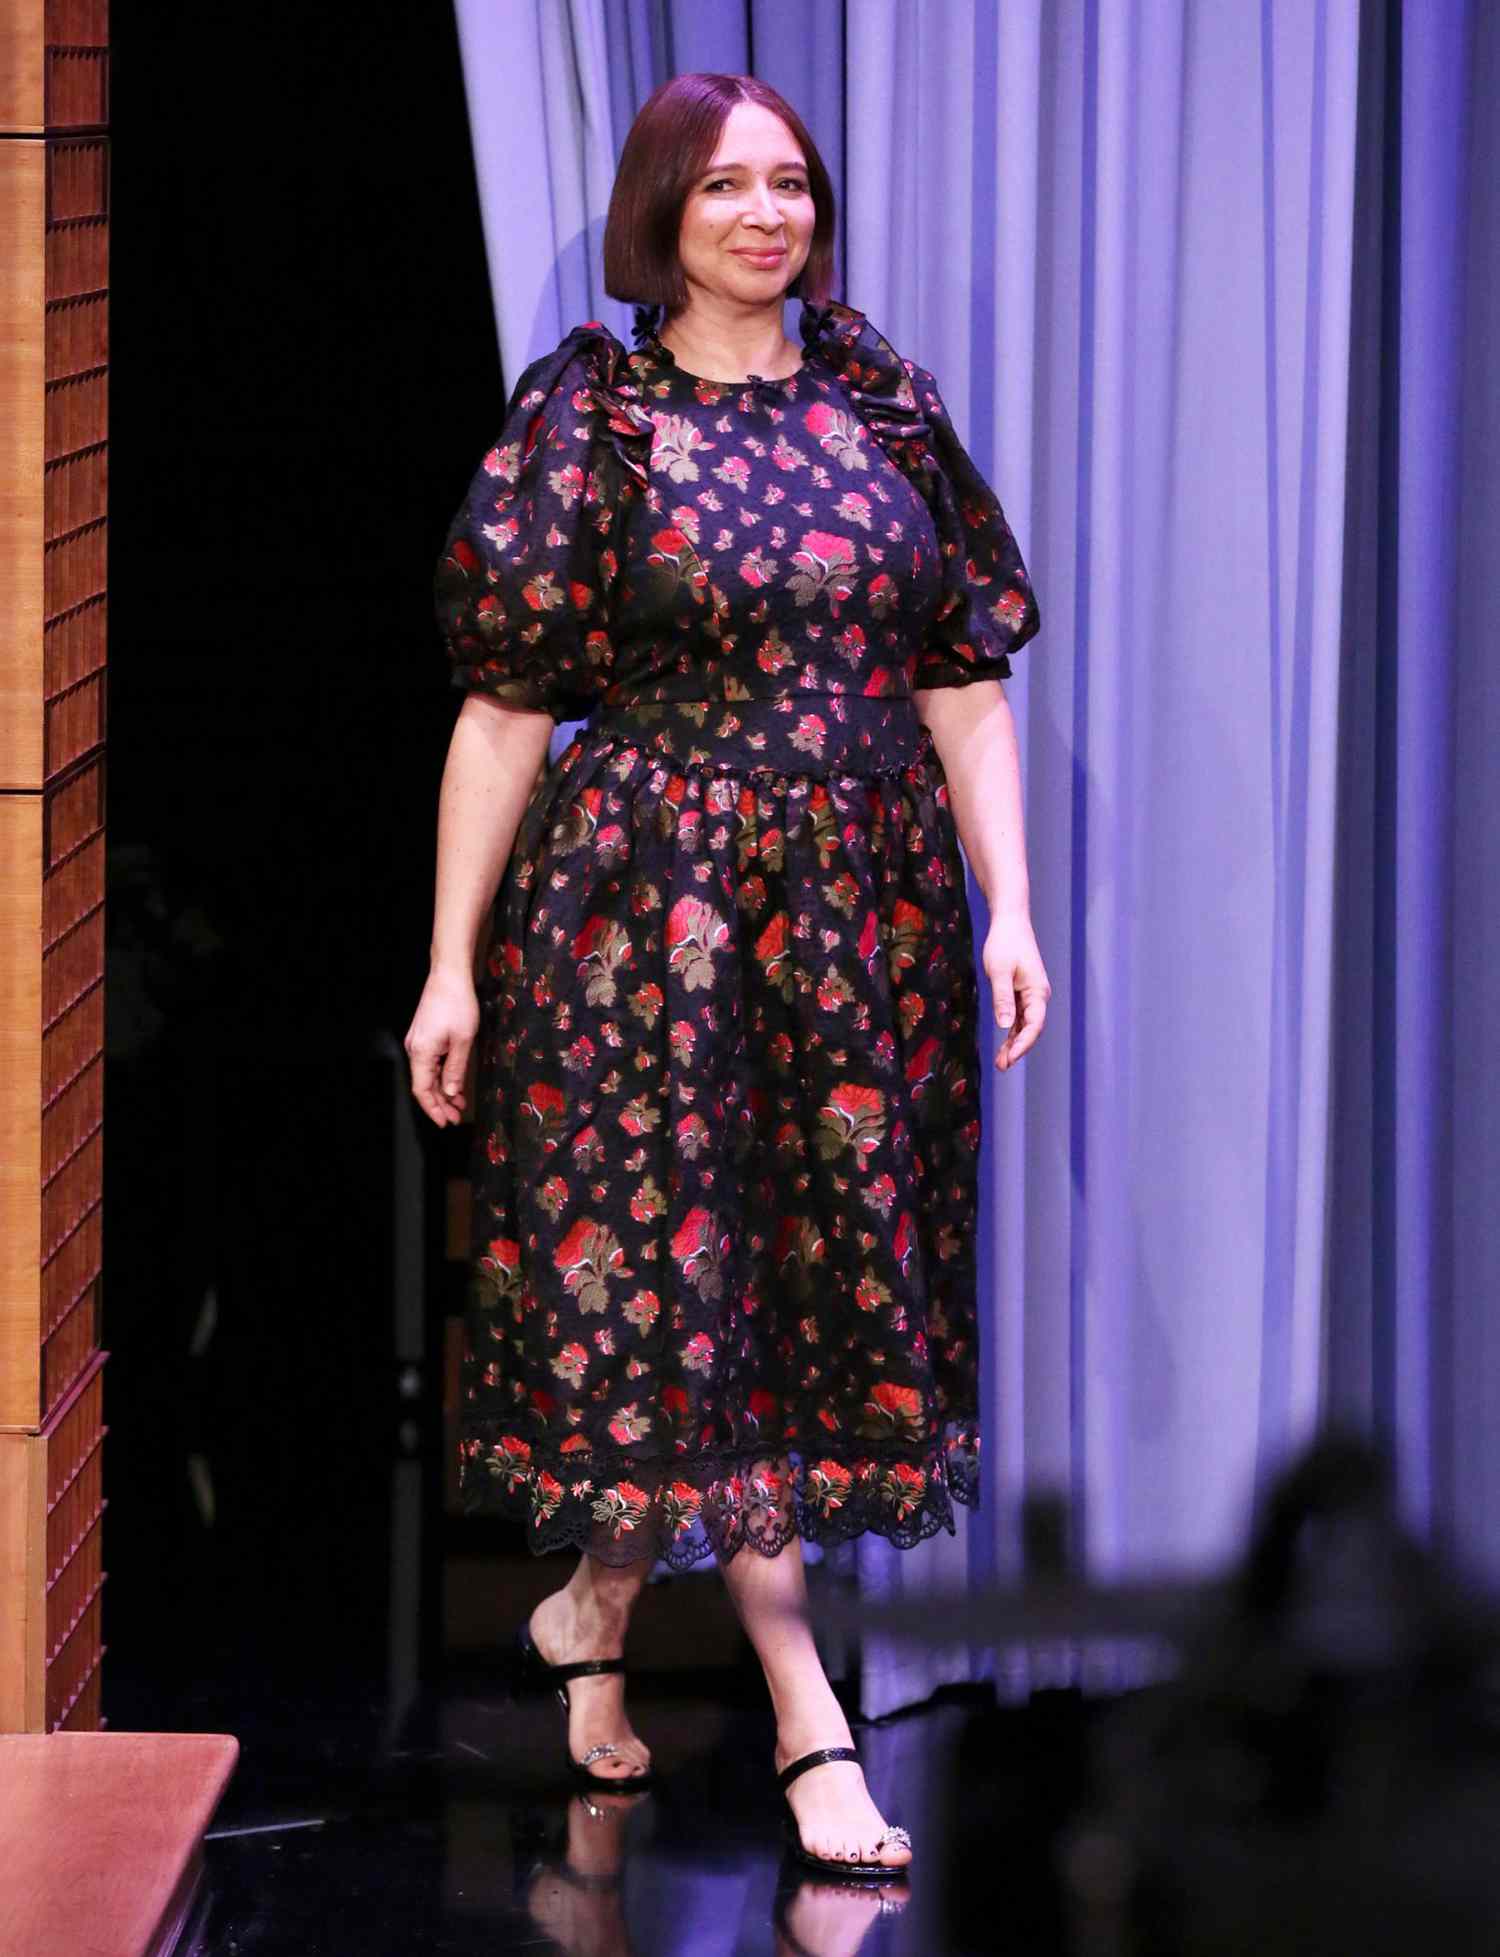 Maya Rudolph arrives to THE TONIGHT SHOW STARRING JIMMY FALLON on Thursday, March 25, 2021